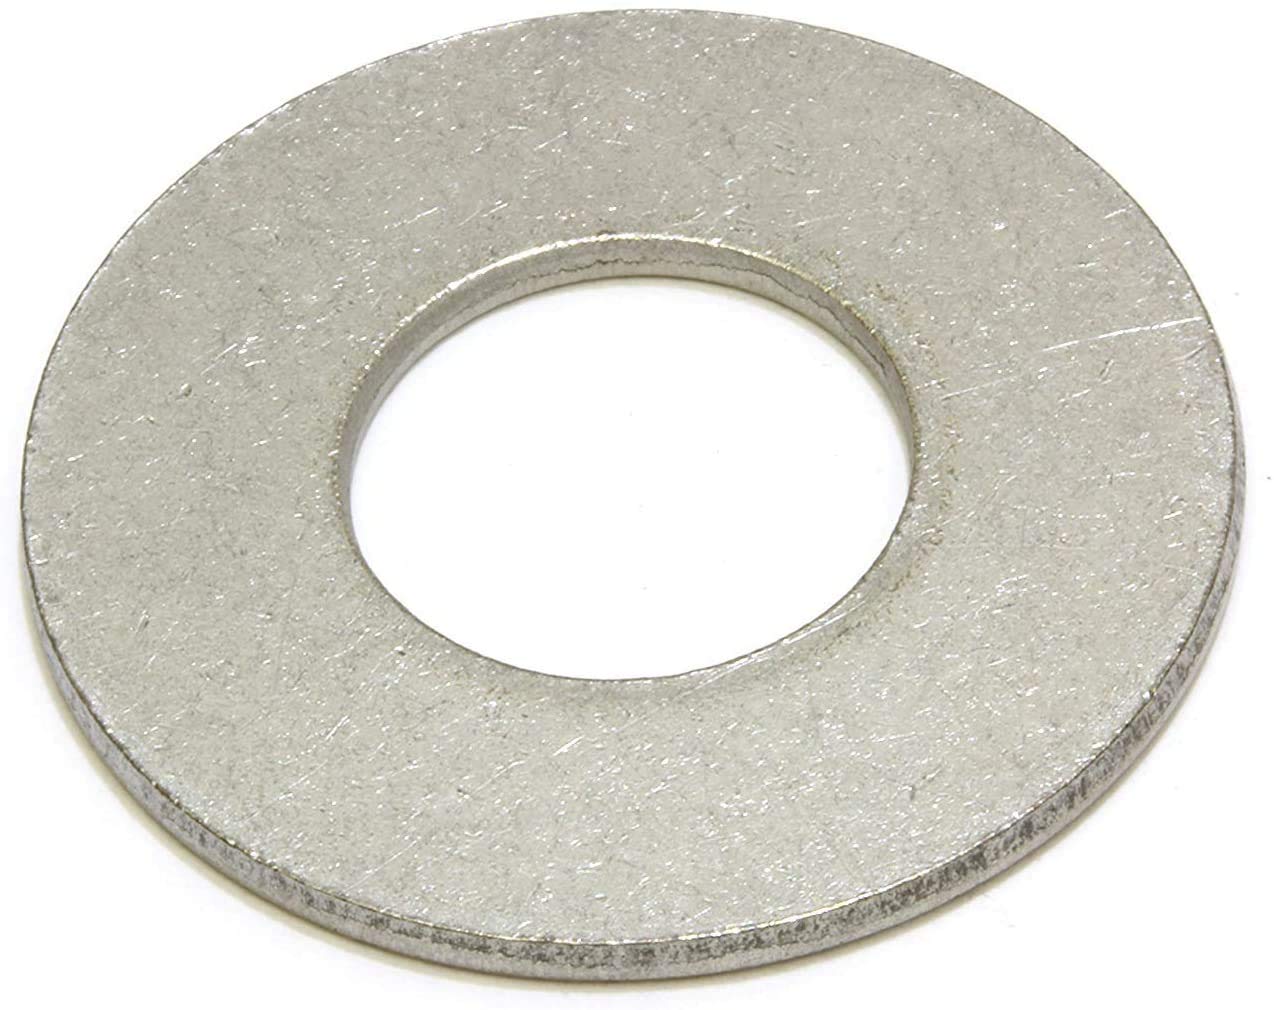 10 Qty 1/2" Stainless Steel SAE Flat Finish Washers 